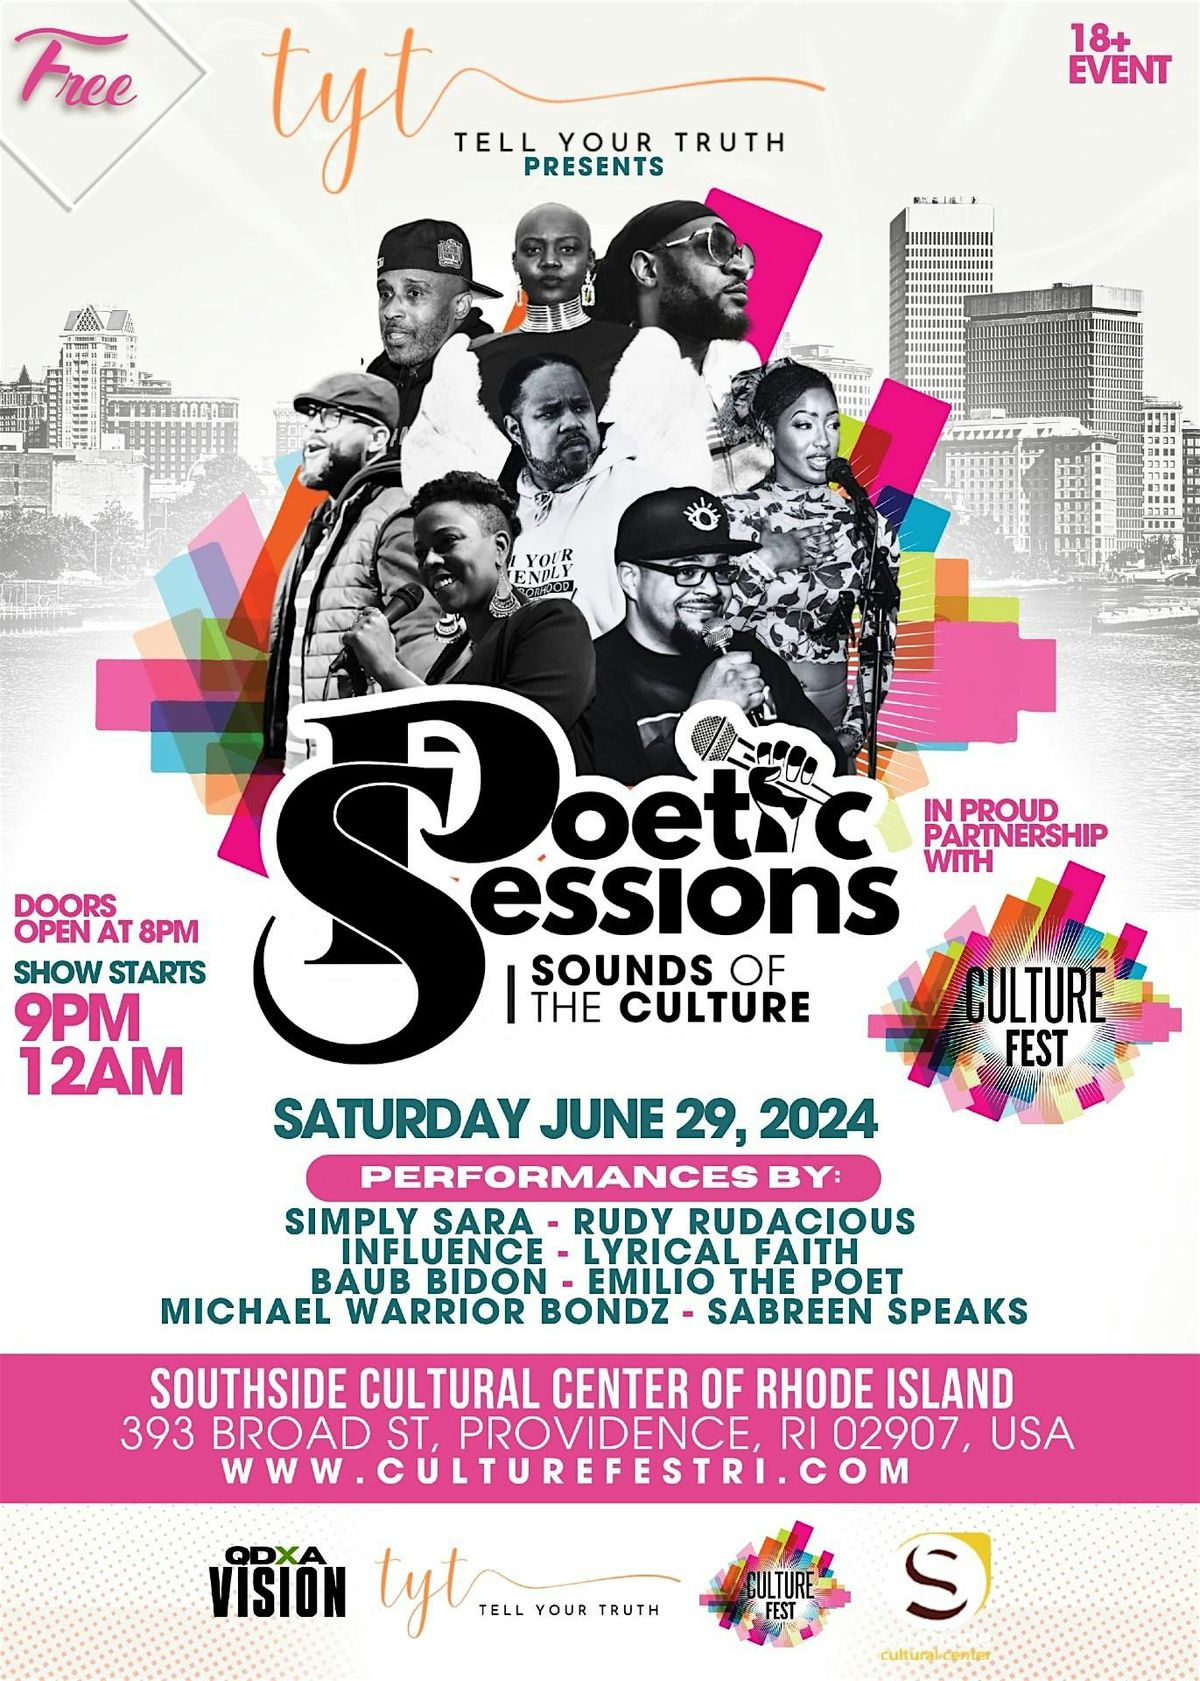 Tell Your Truth Presents Poetic Sessions - Sounds of the Culture